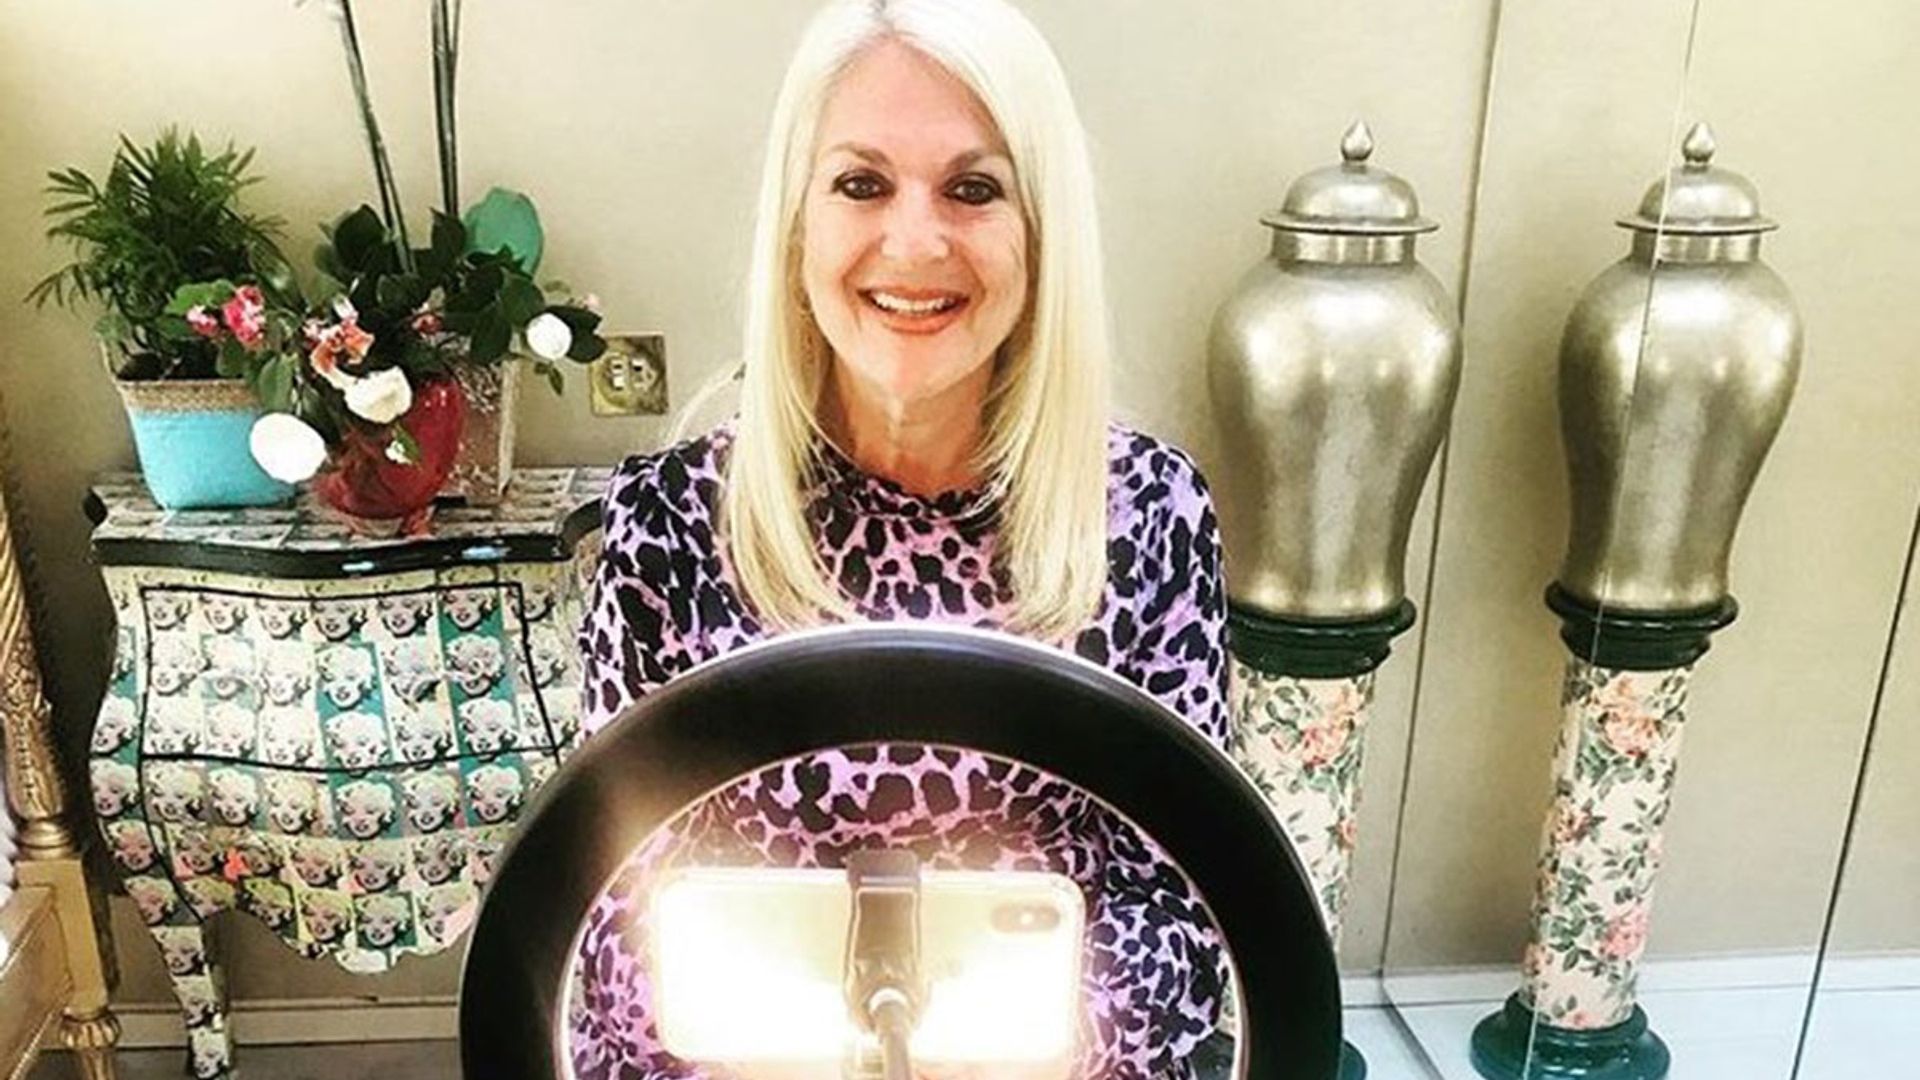 This Morning's Vanessa Feltz has the most amazing bed we've ever seen